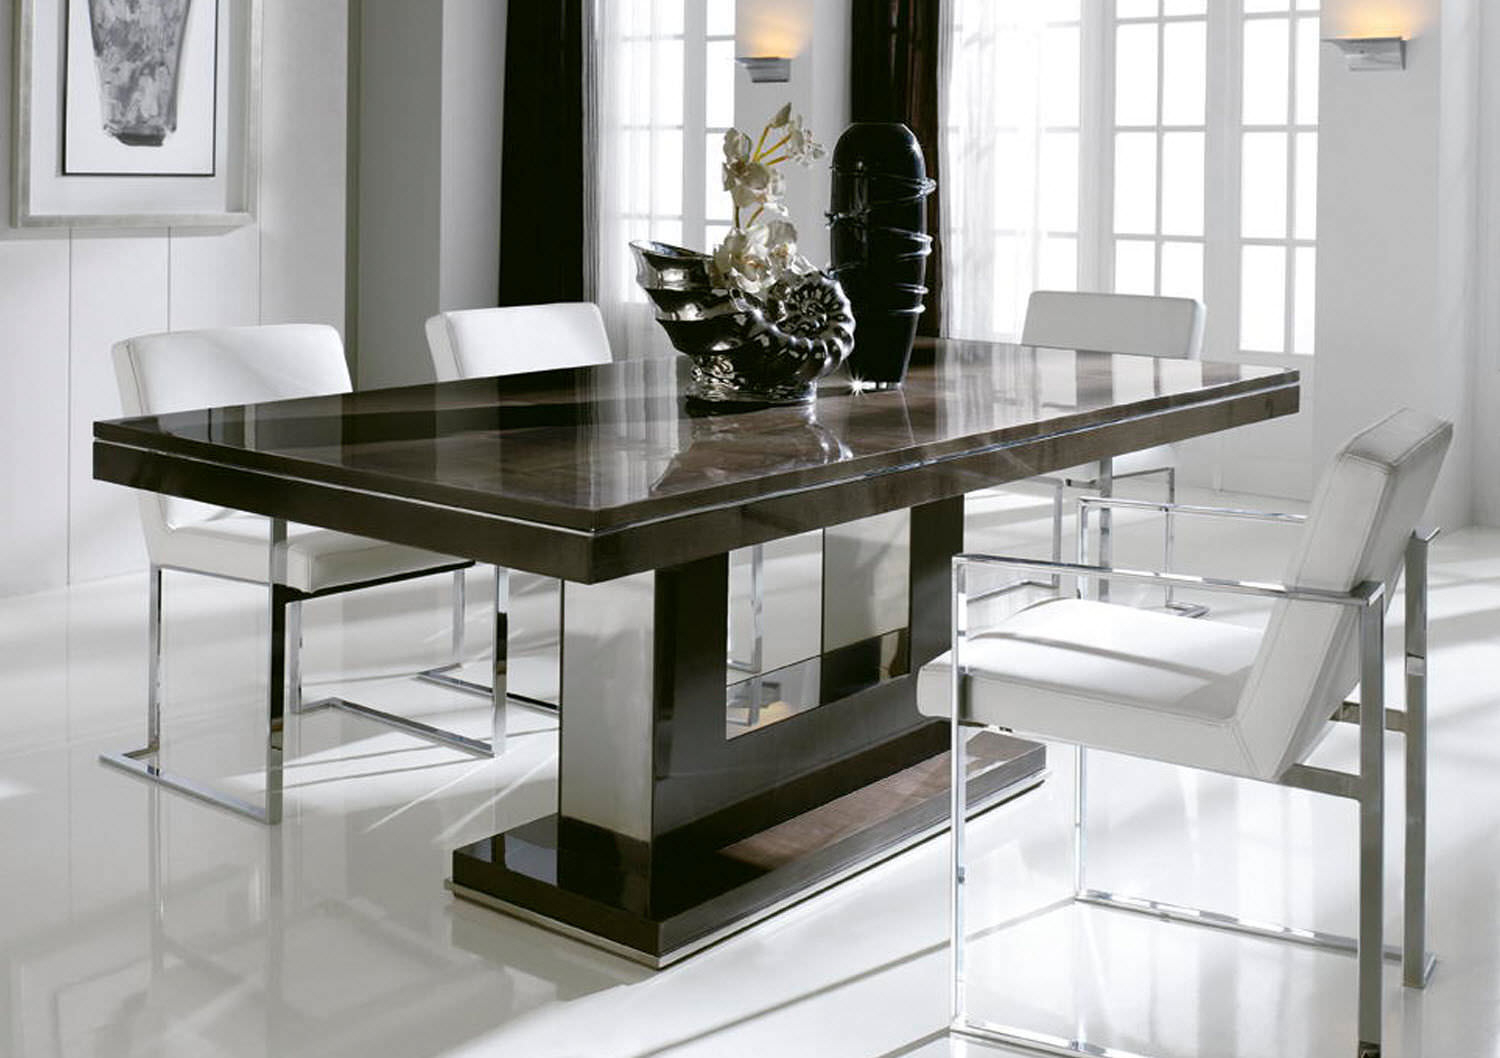 Unusual Dining Table And Chairs Uk • Faucet Ideas Site